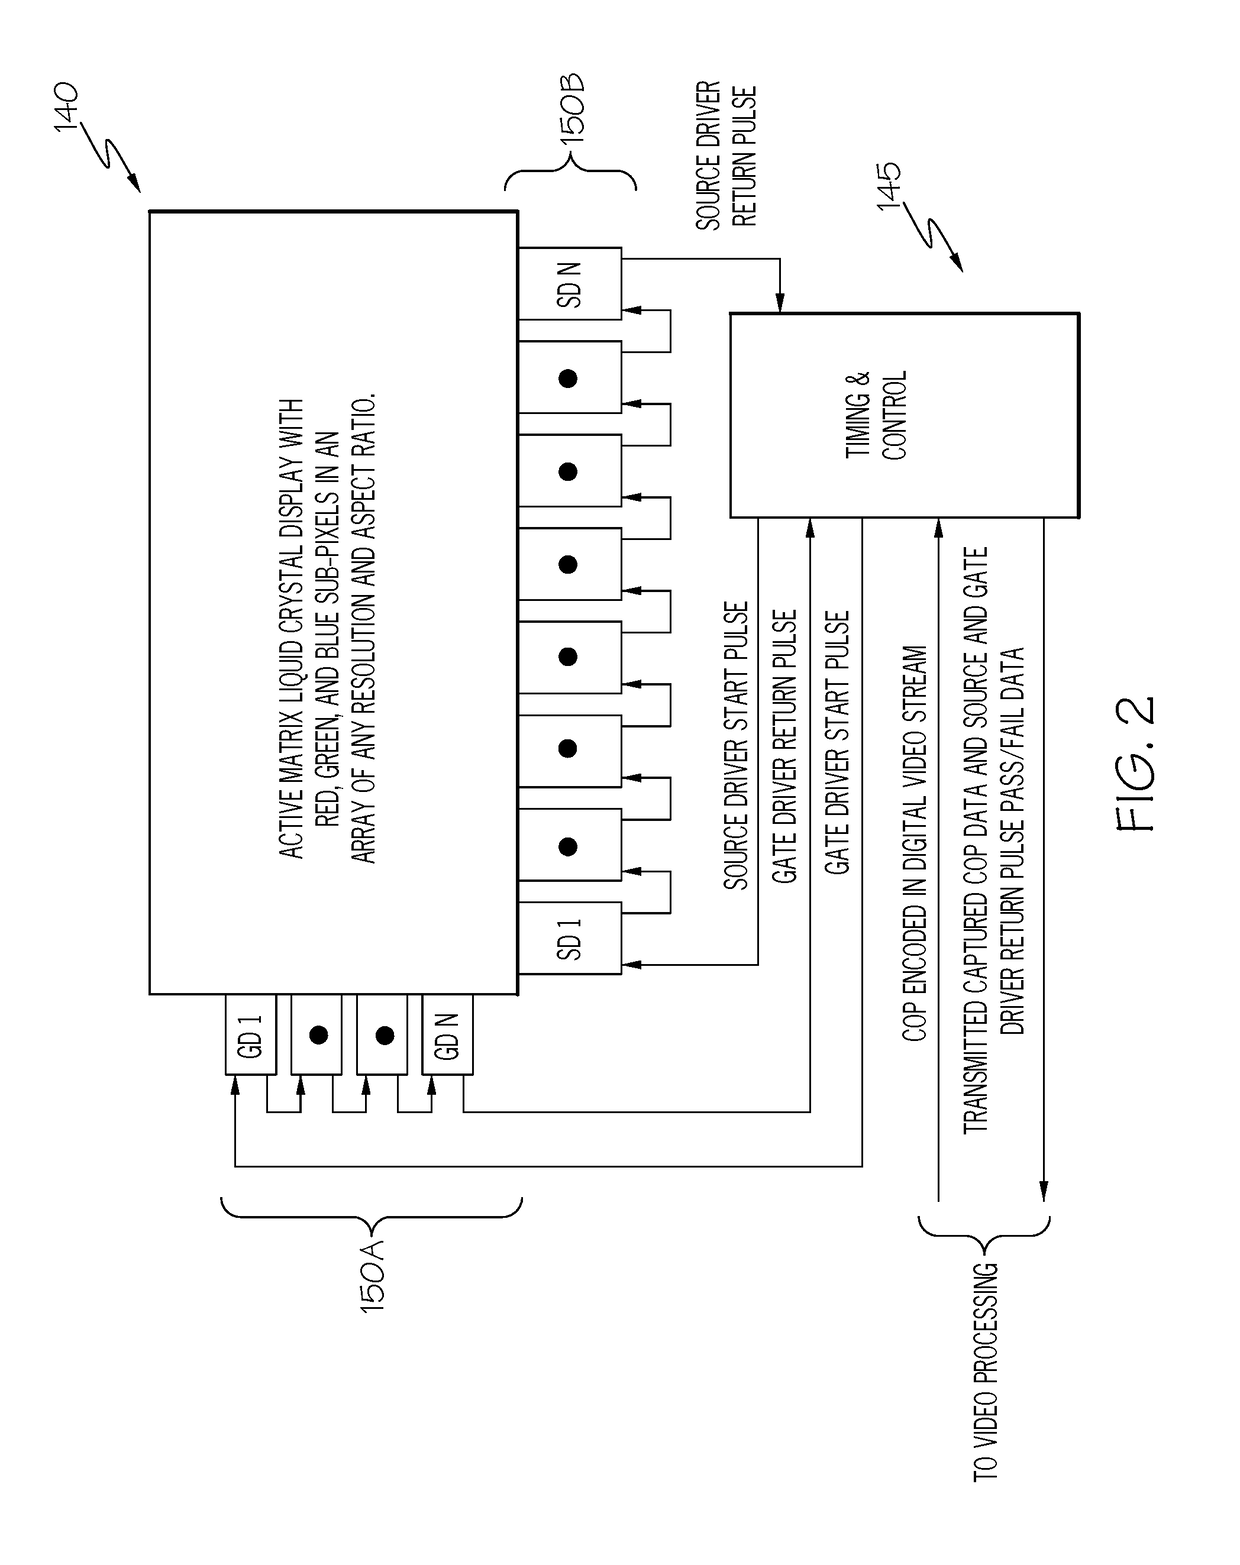 Fault detection for a display system